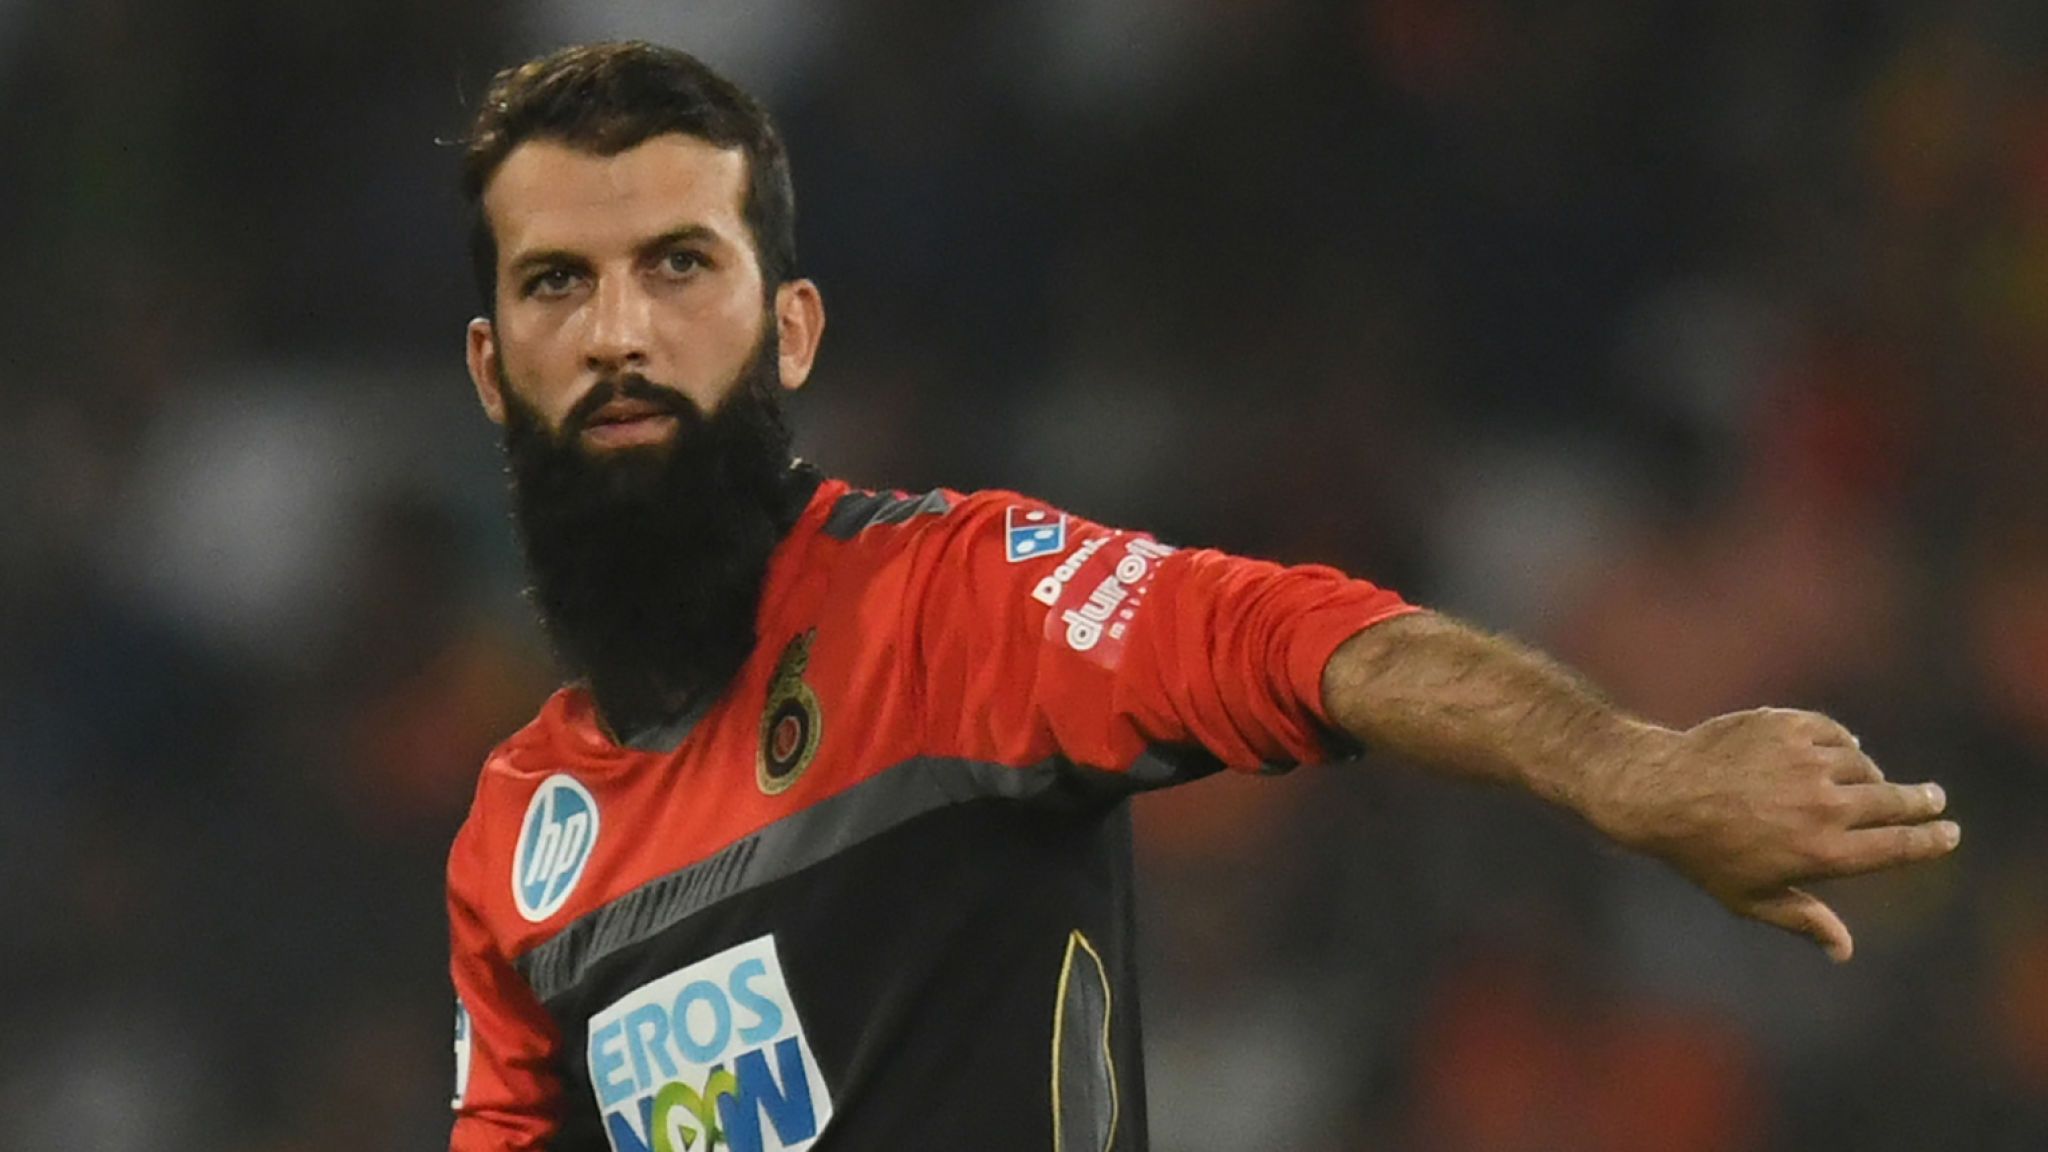 England Man Ali Also Struck Twice With The Ball - Moeen Ali In Rcb - HD Wallpaper 